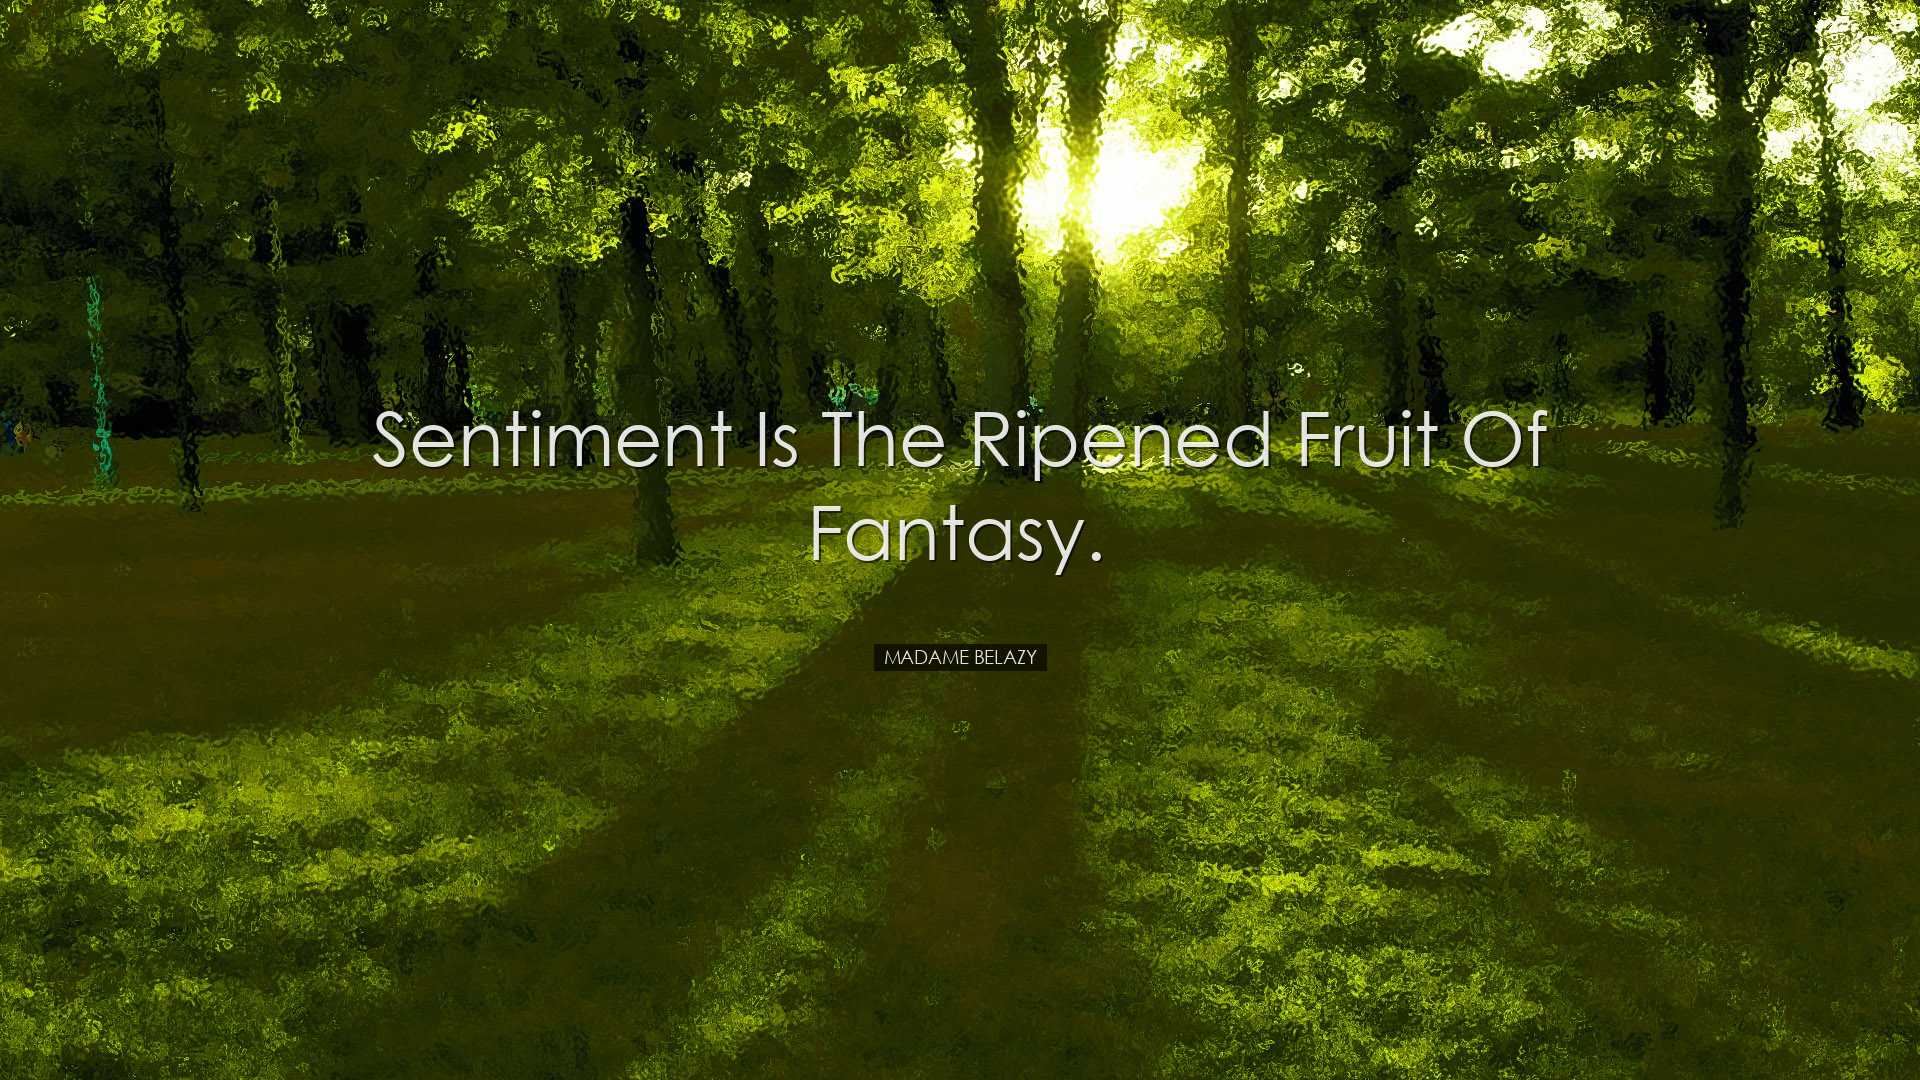 Sentiment is the ripened fruit of fantasy. - Madame Belazy